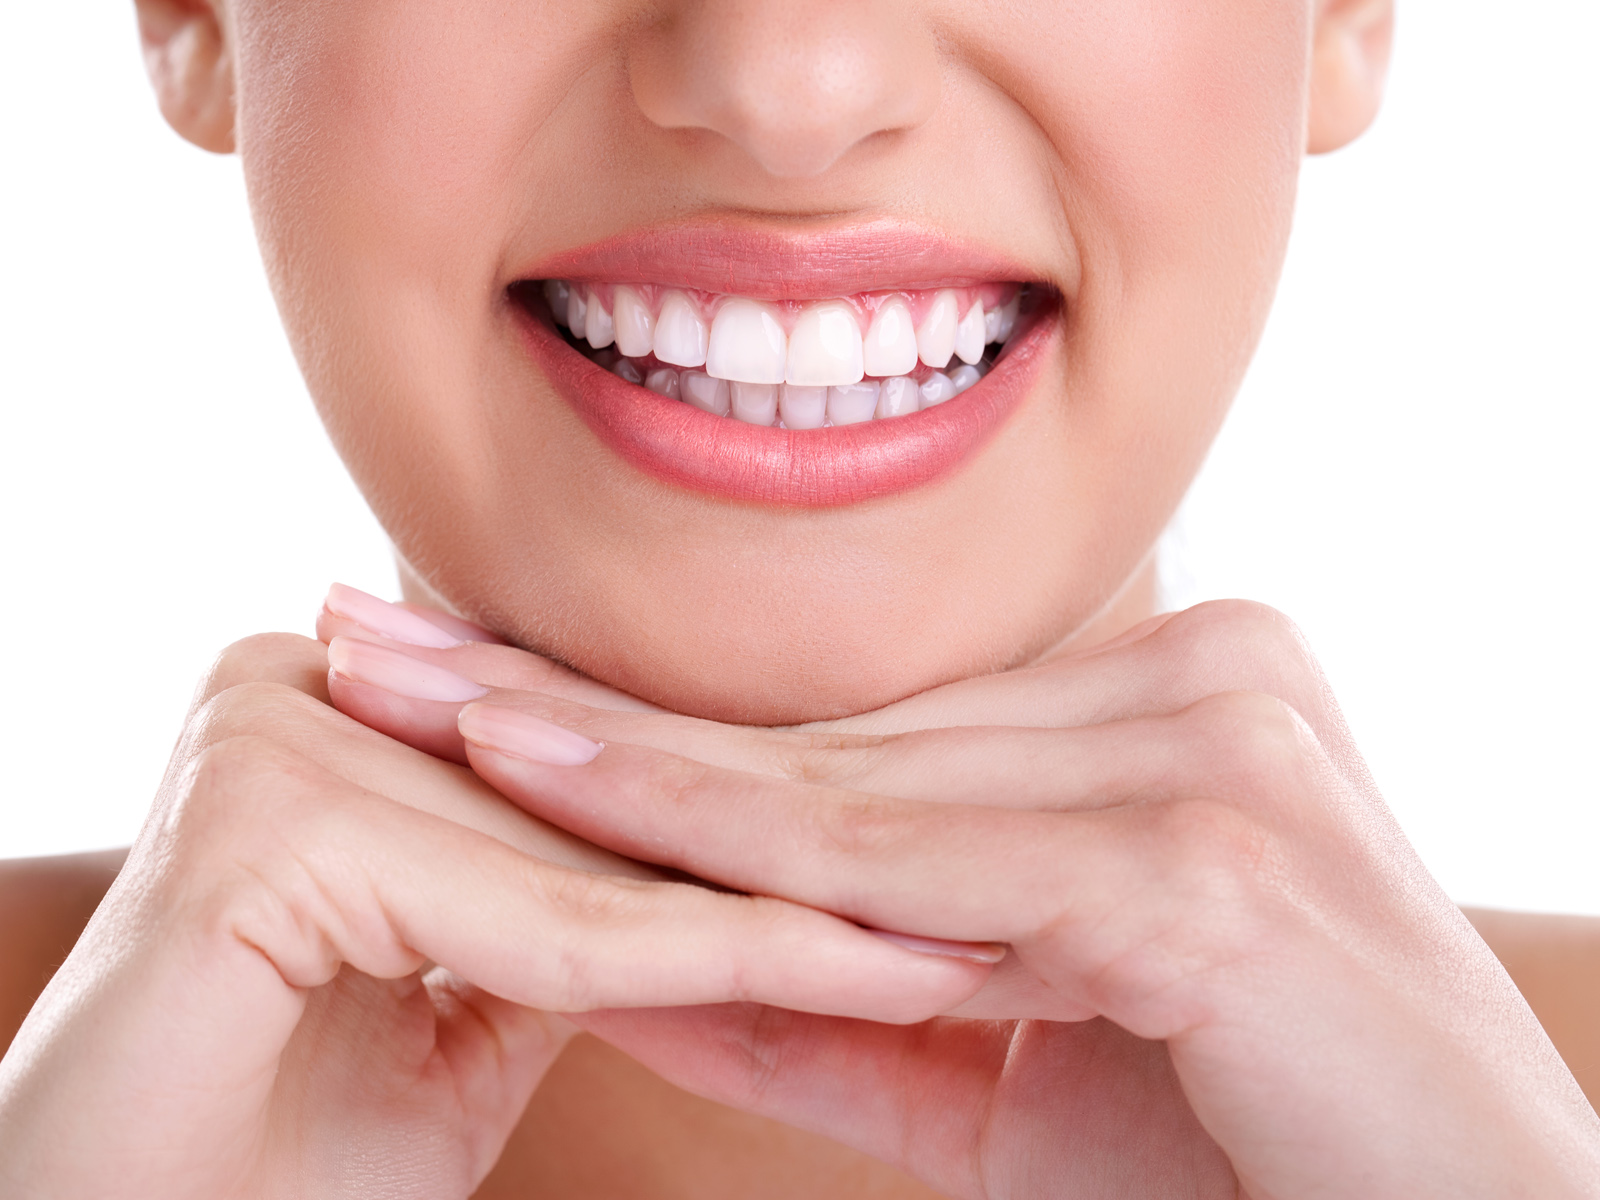 How To Restore And Strengthen Tooth Enamel Naturally?